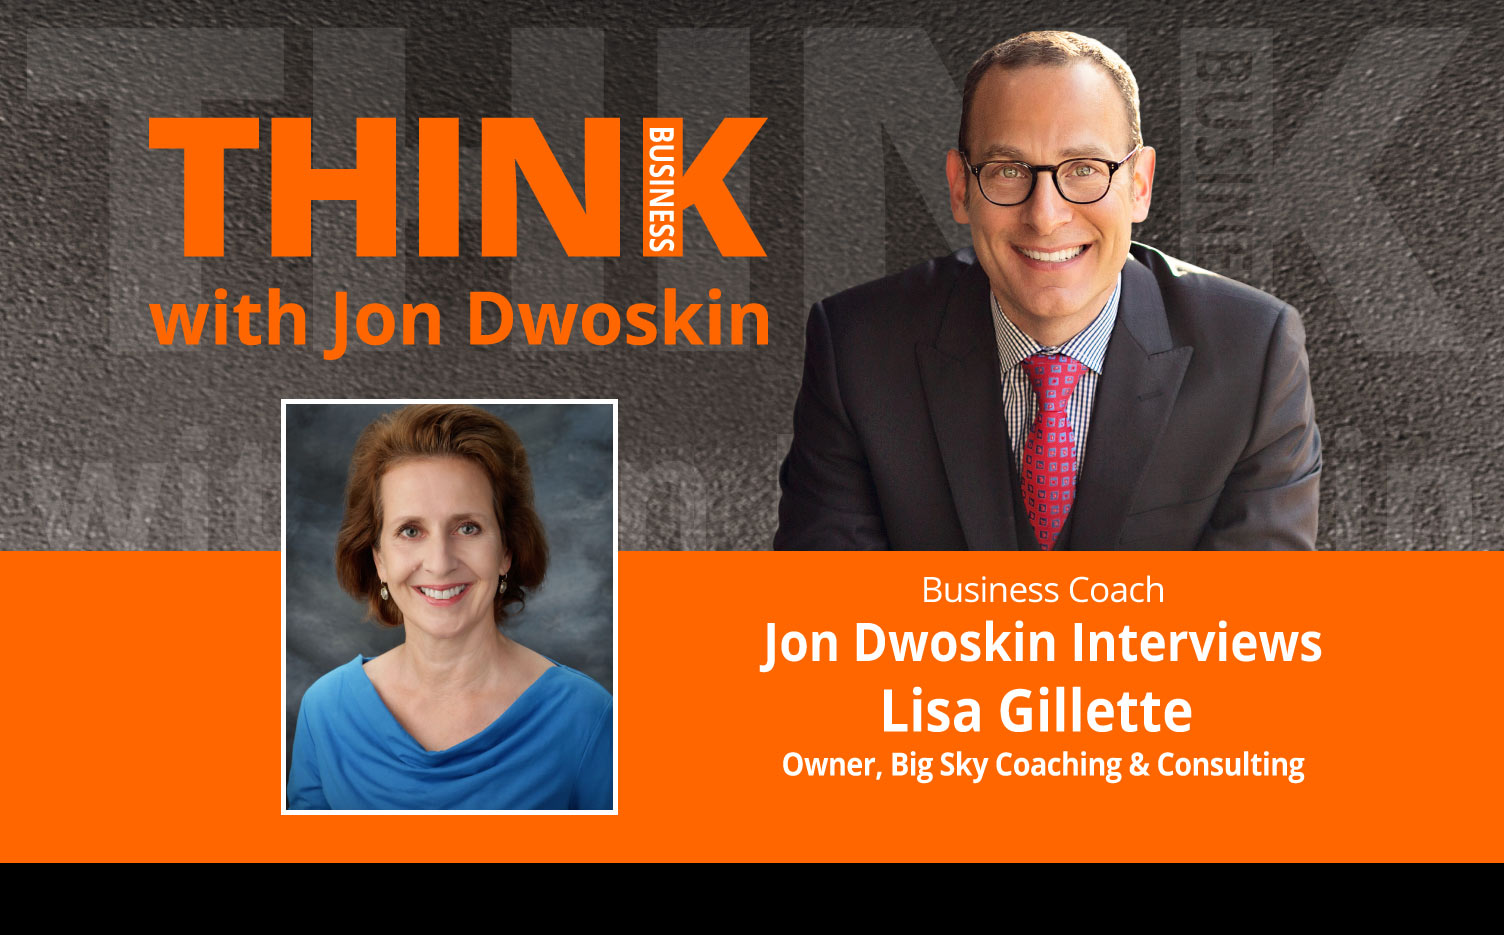 THINK Business Podcast: Jon Dwoskin Interviews Lisa Gillette, Owner, Big Sky Coaching & Consulting